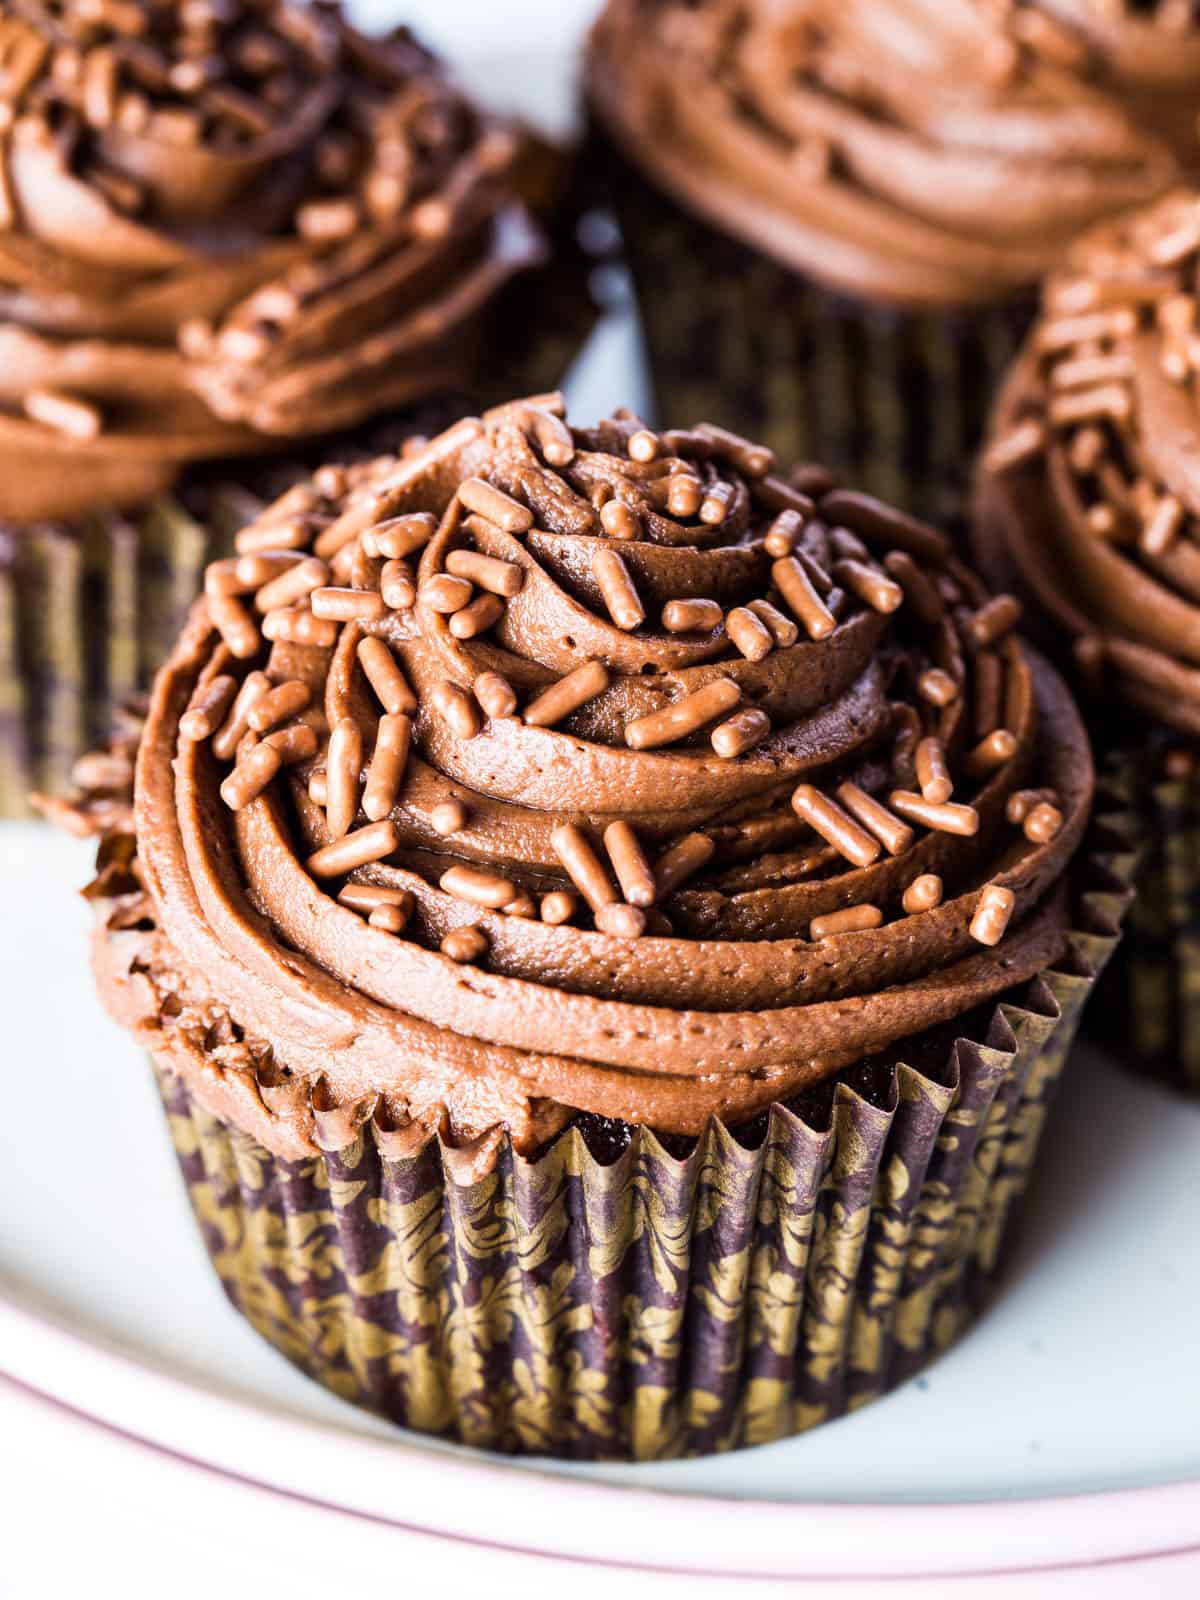 Gluten-free chocolate cupcakes with frosting on platter.